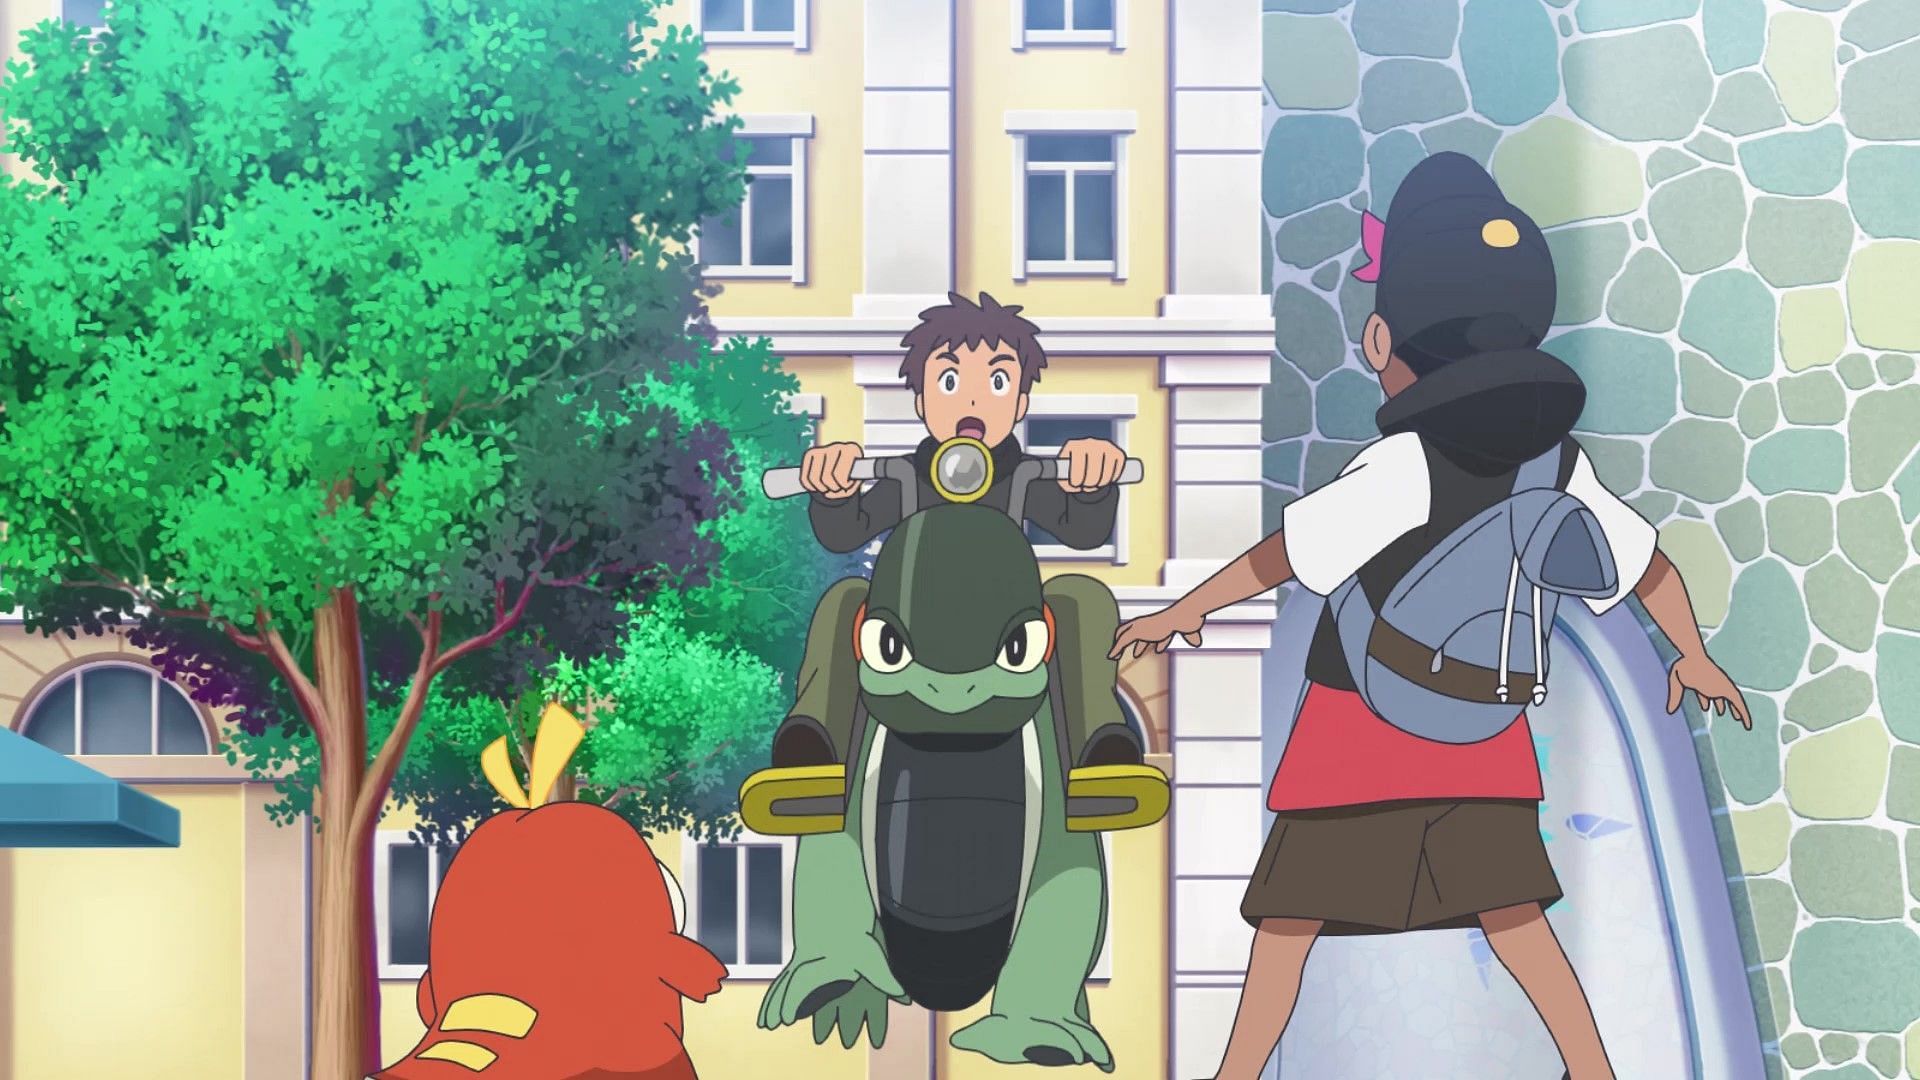 Our heroes finally visit Mesagoza City and meet some new Paldean Pokemon in Horizons Episode 9 (Image via The Pokemon Company)